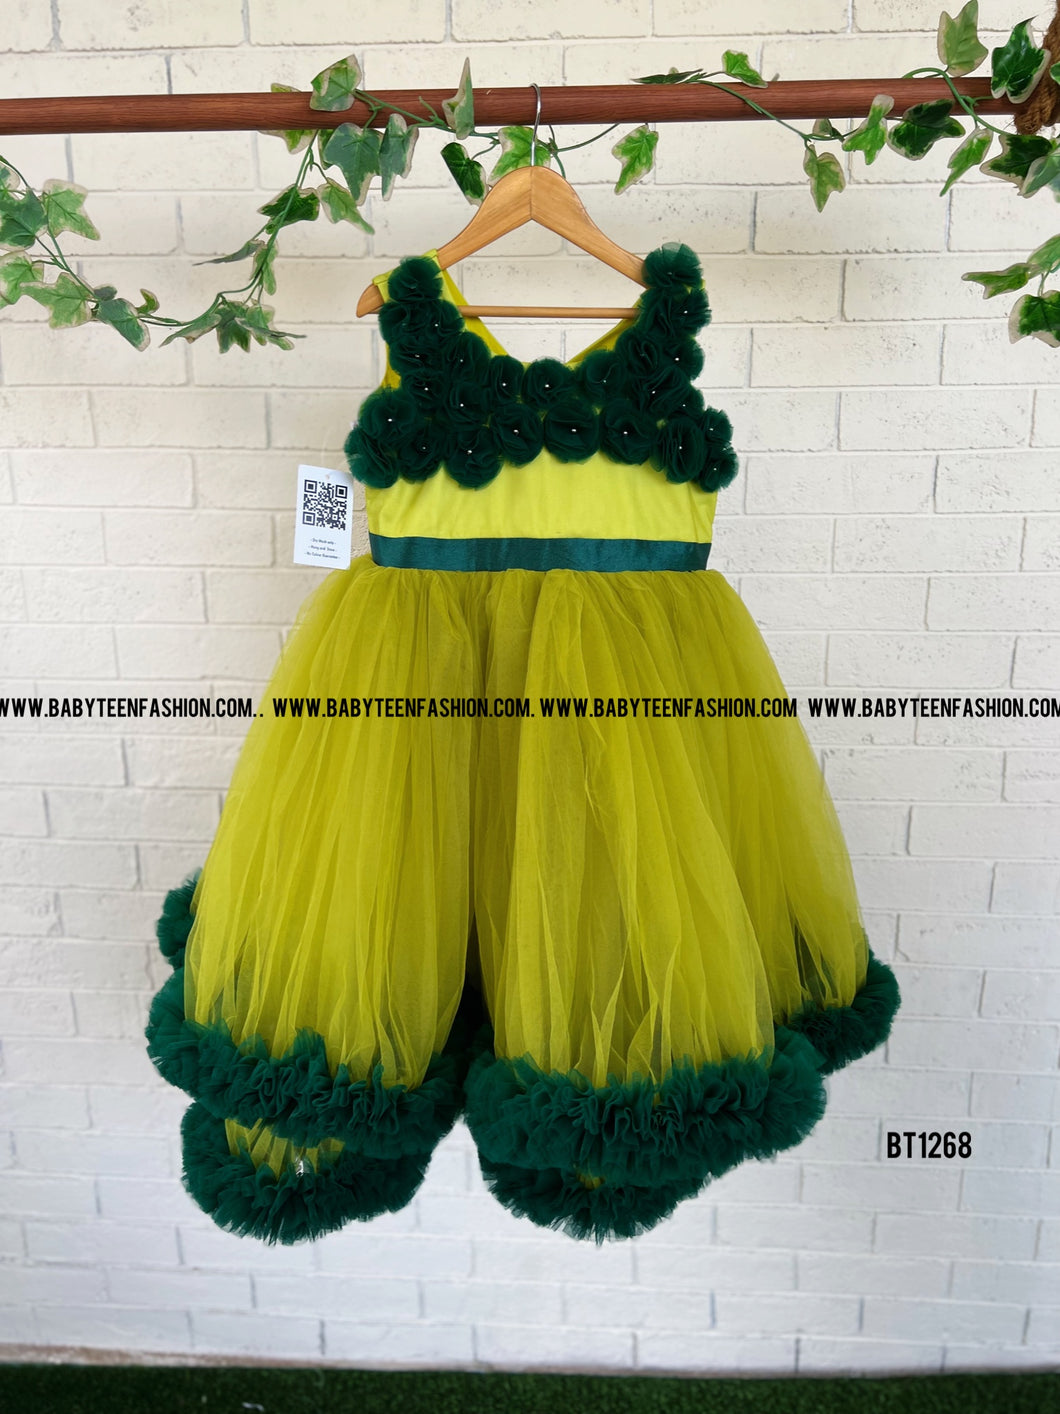 BT1268 Olive Flower Theme Birthday Party wear Frock